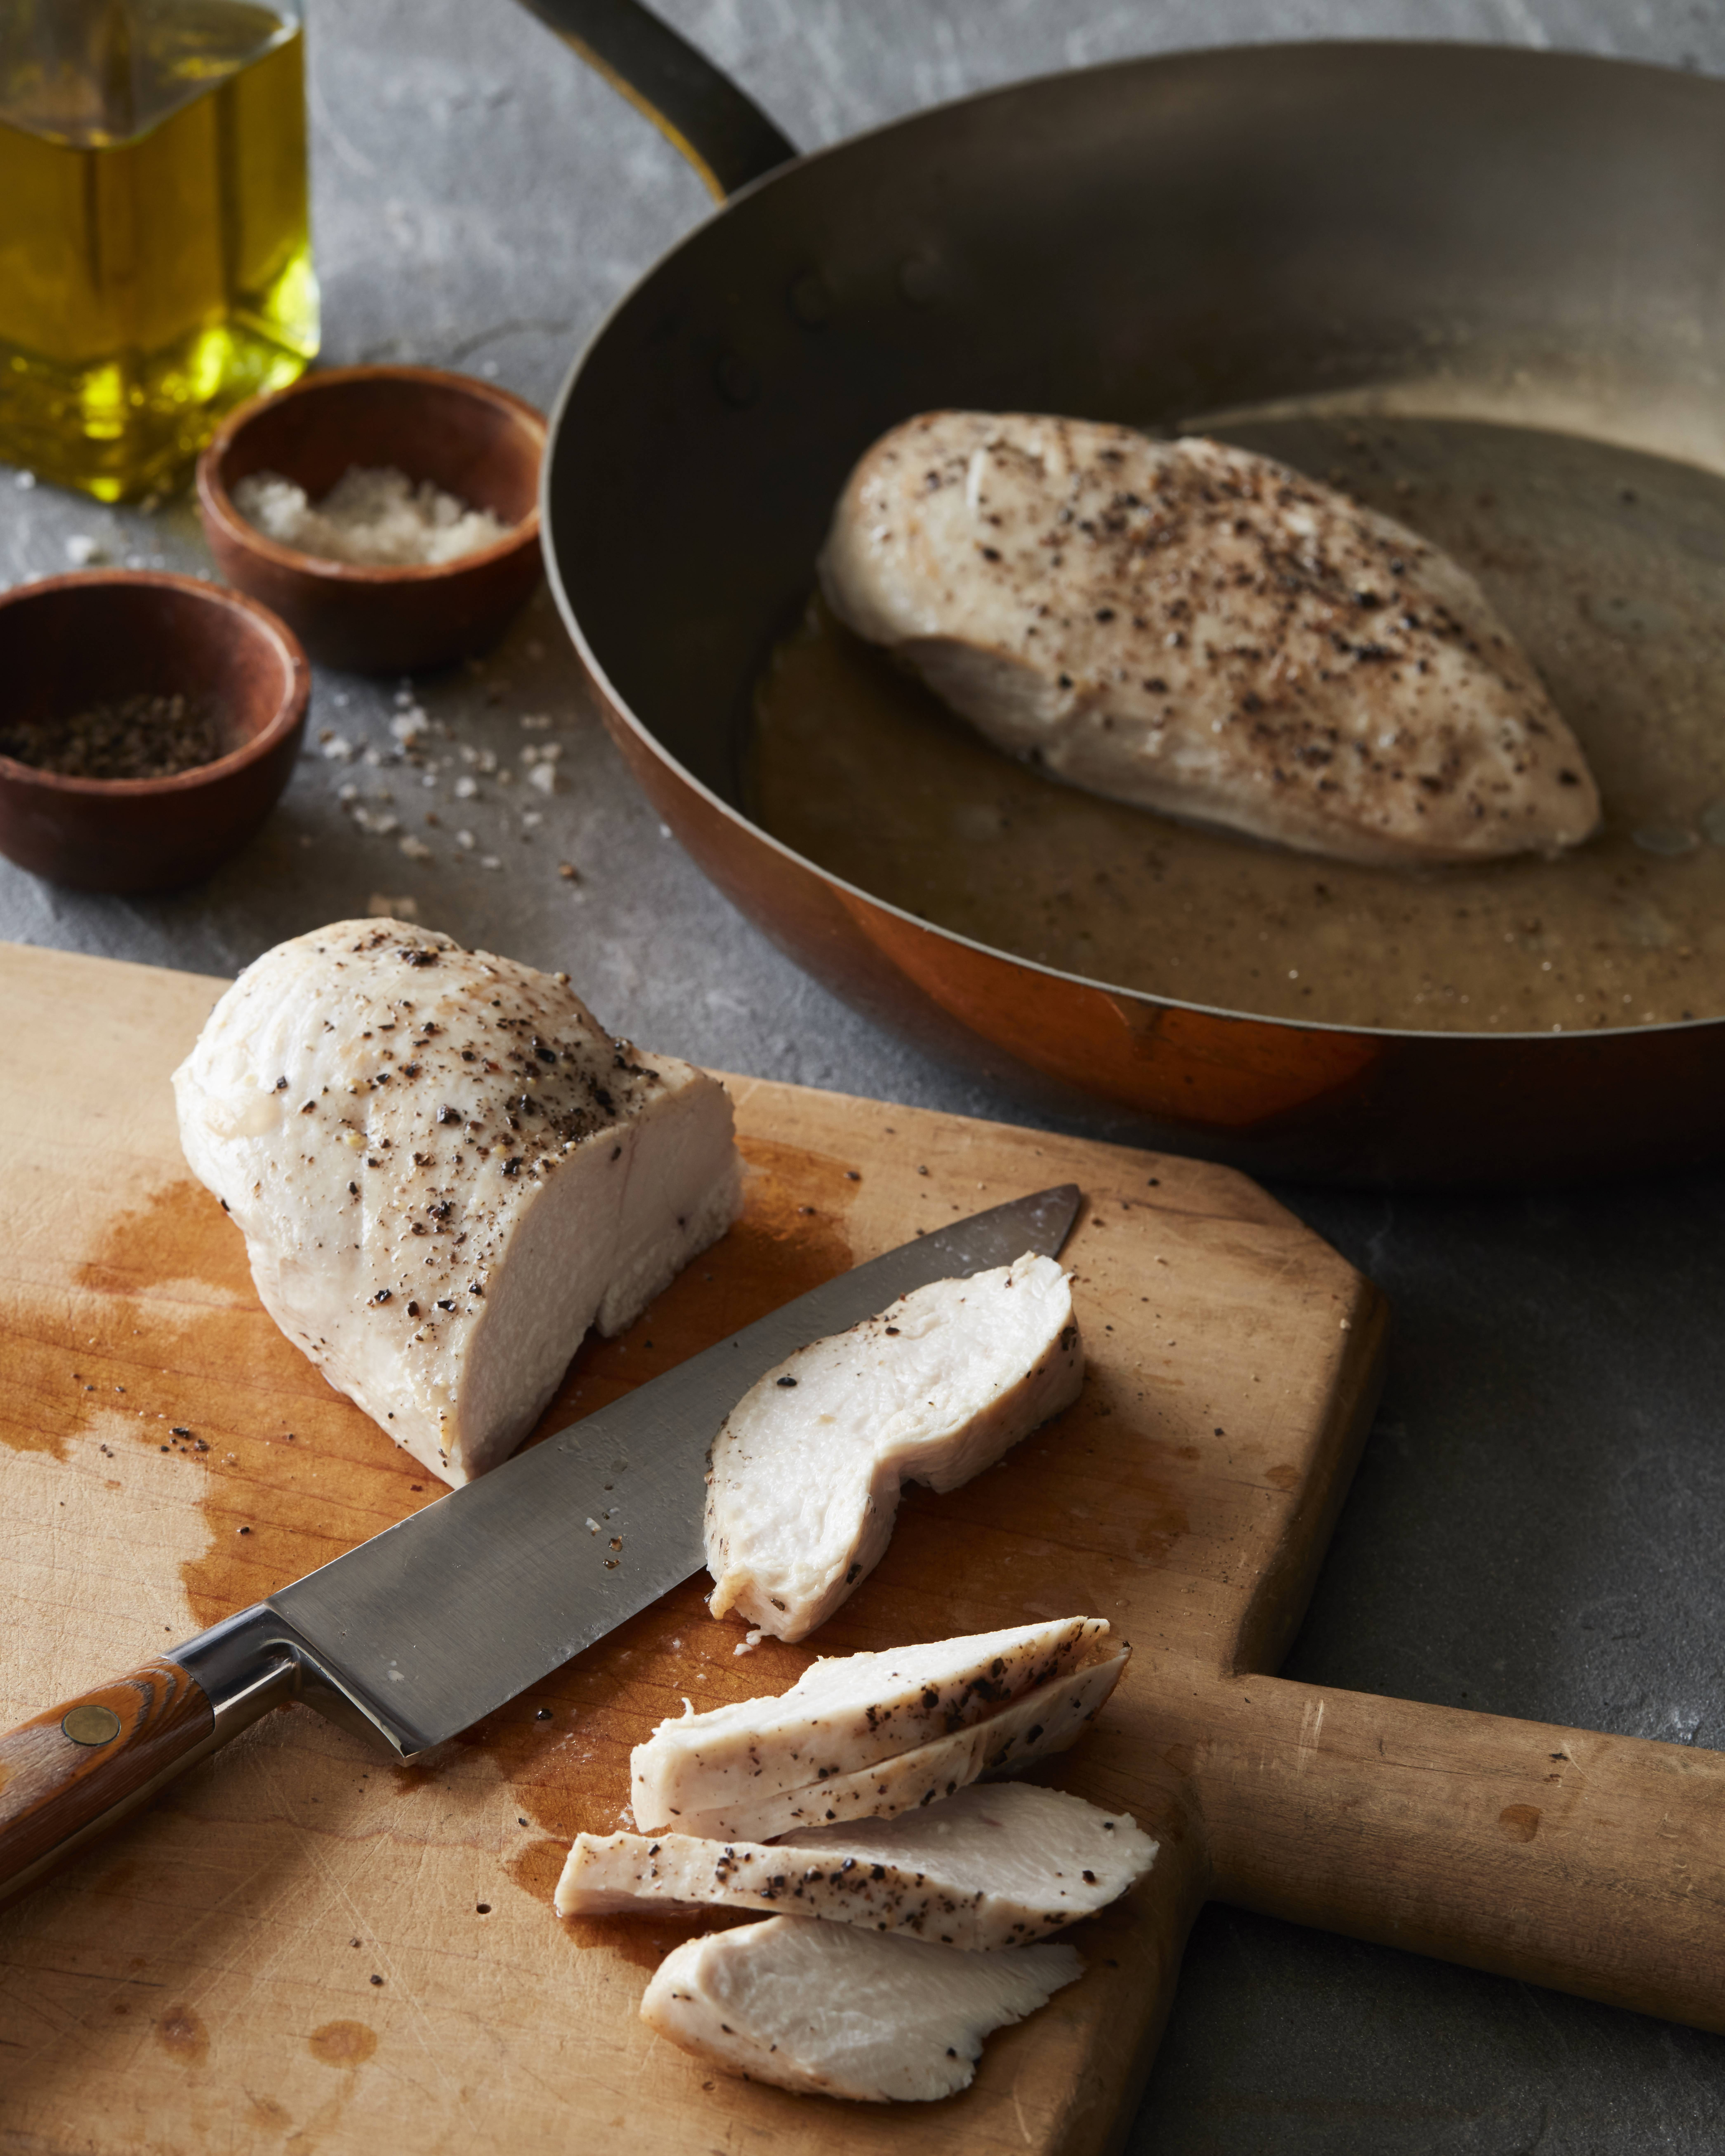 Perfect boneless, skinless chicken breasts sliced on a cutting board